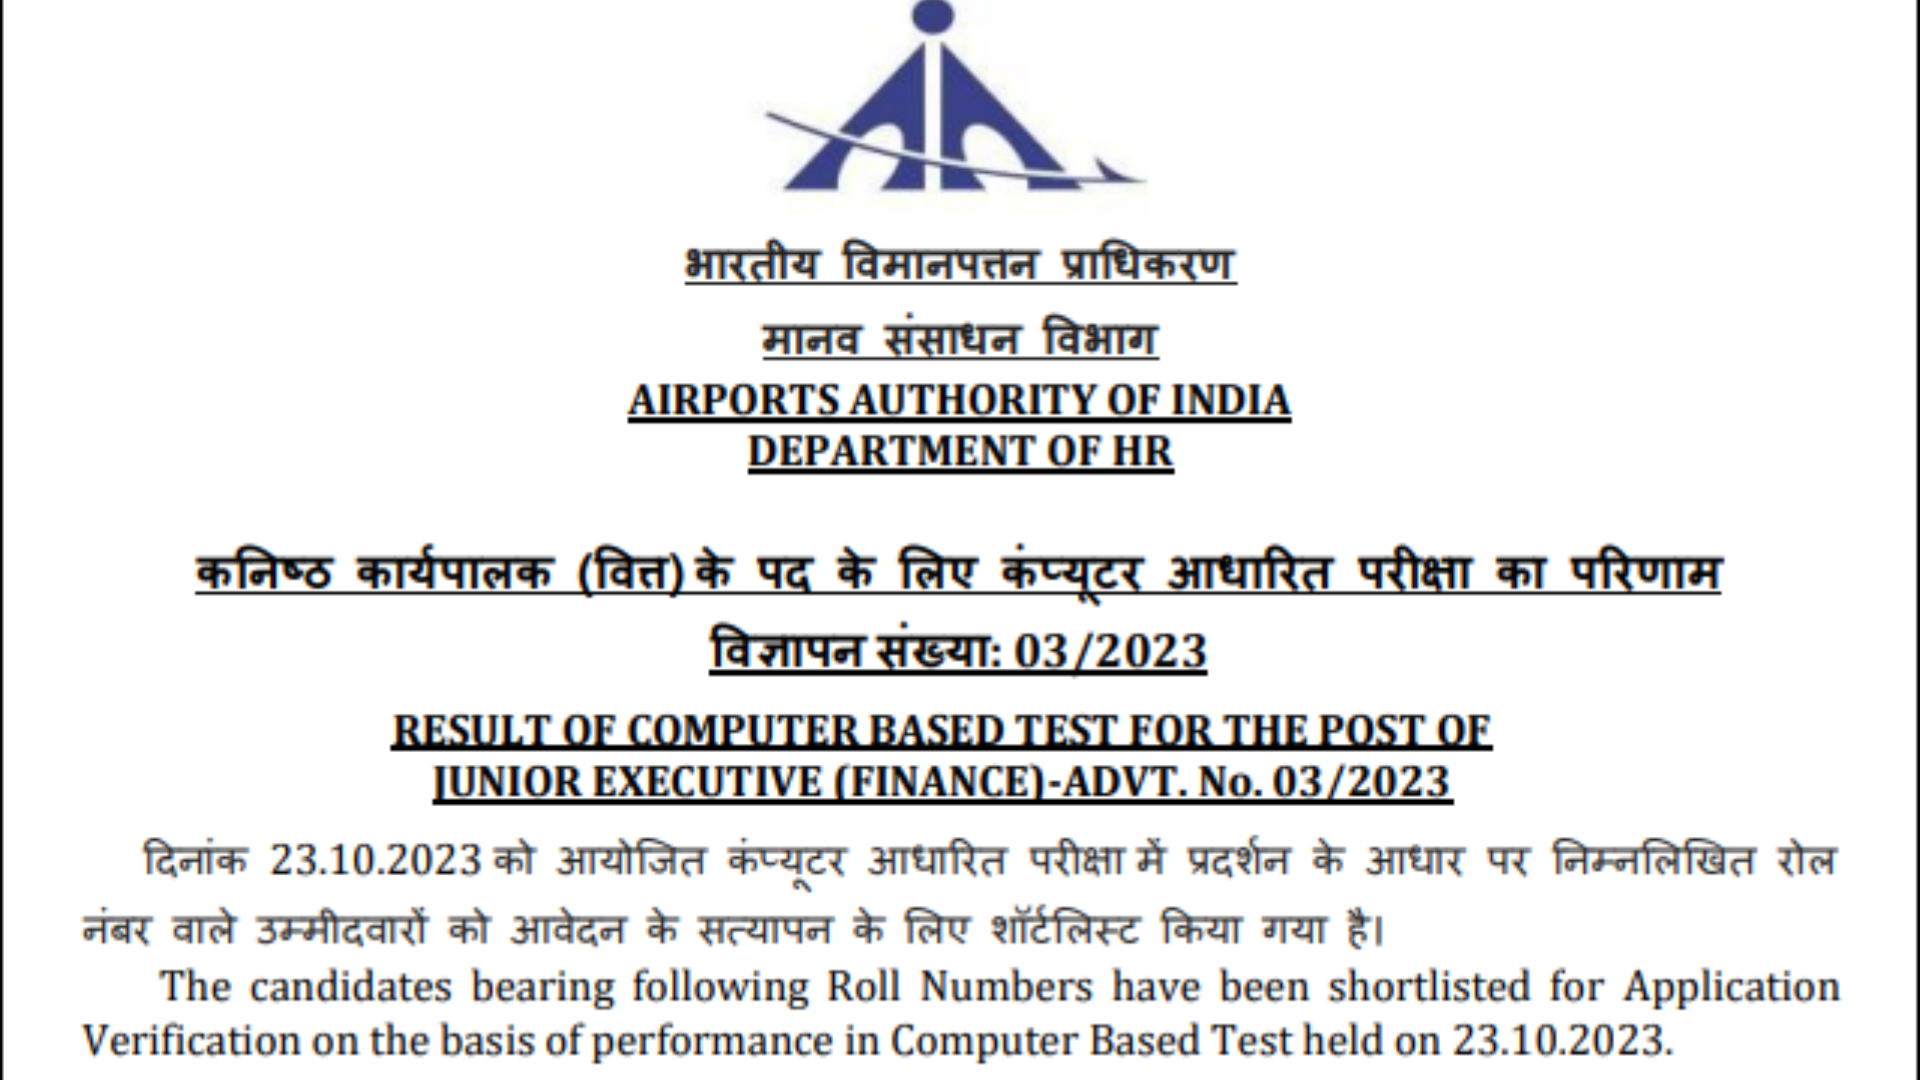 AAI Result 2023 Out for Junior Executive, Assistant CBT Written Exam for Advt 03/2023